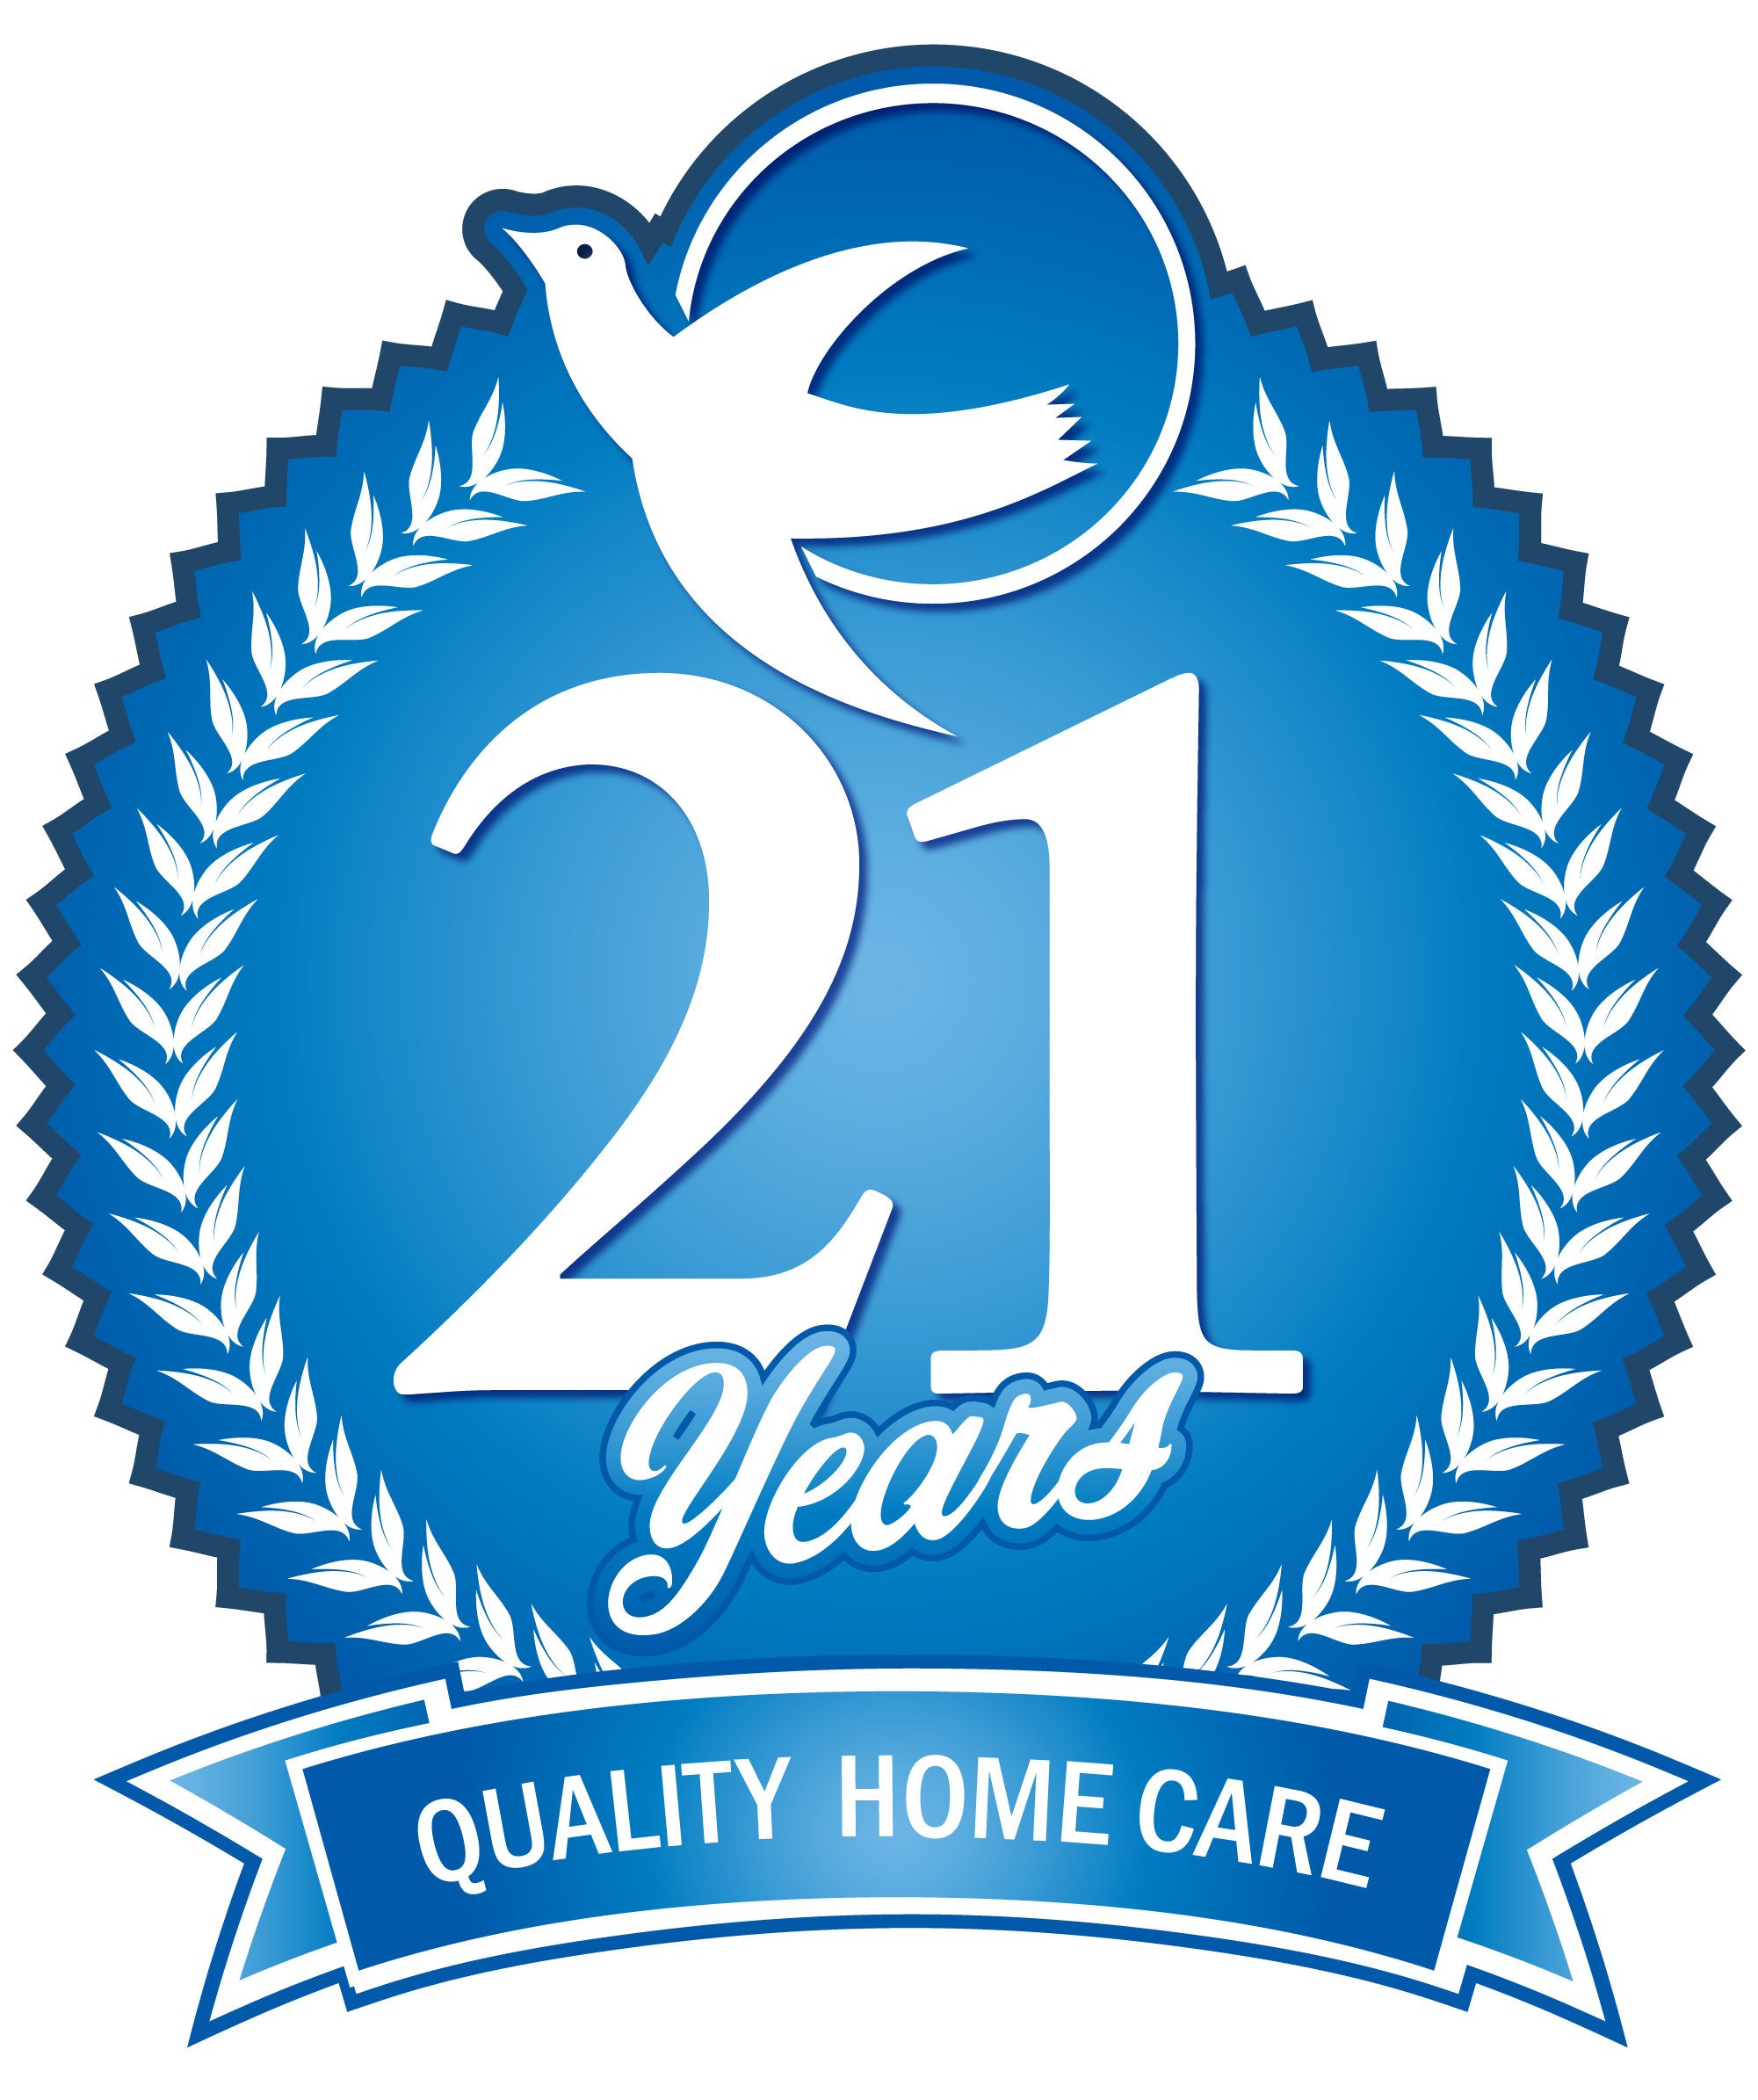 21 years of senior home care badge